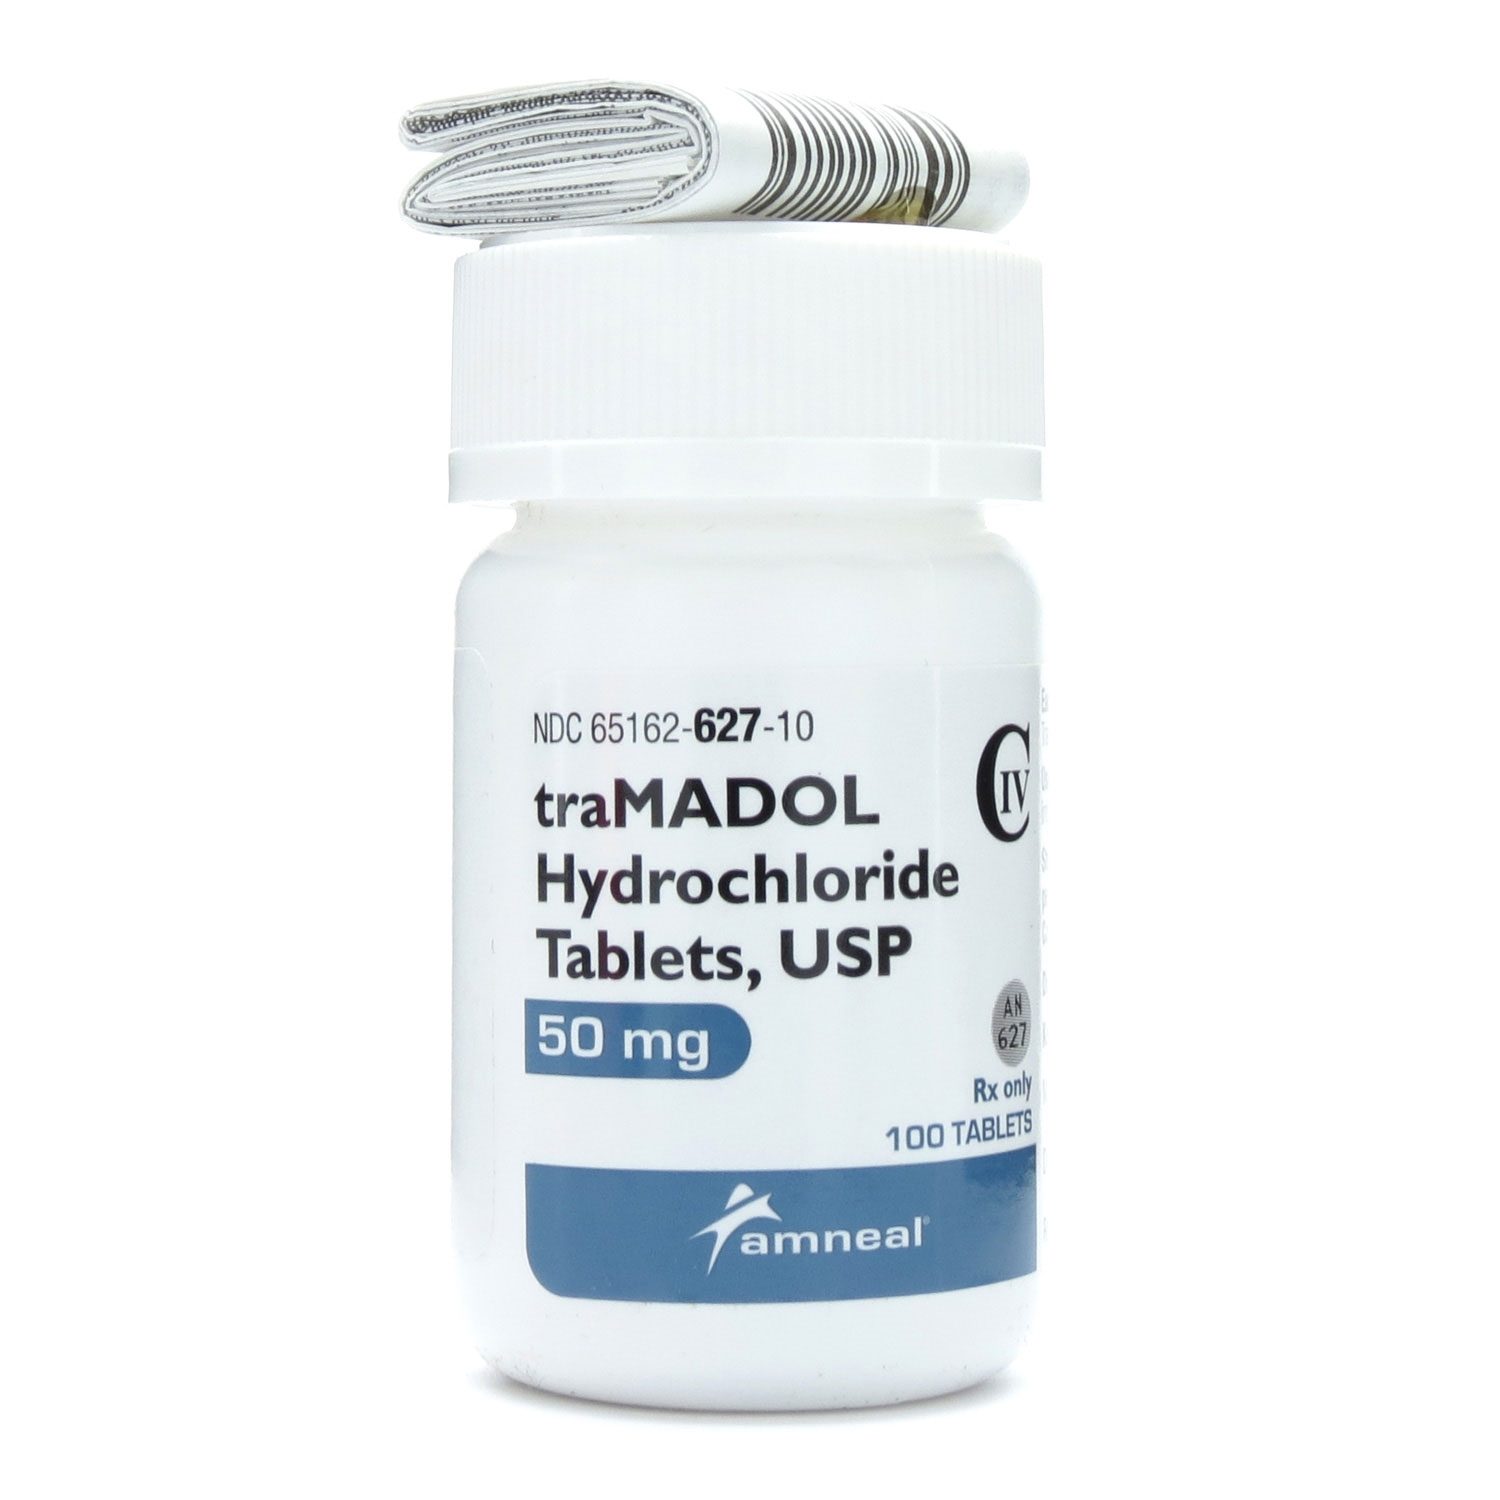 tramadol hcl 50mg dosage for dogs